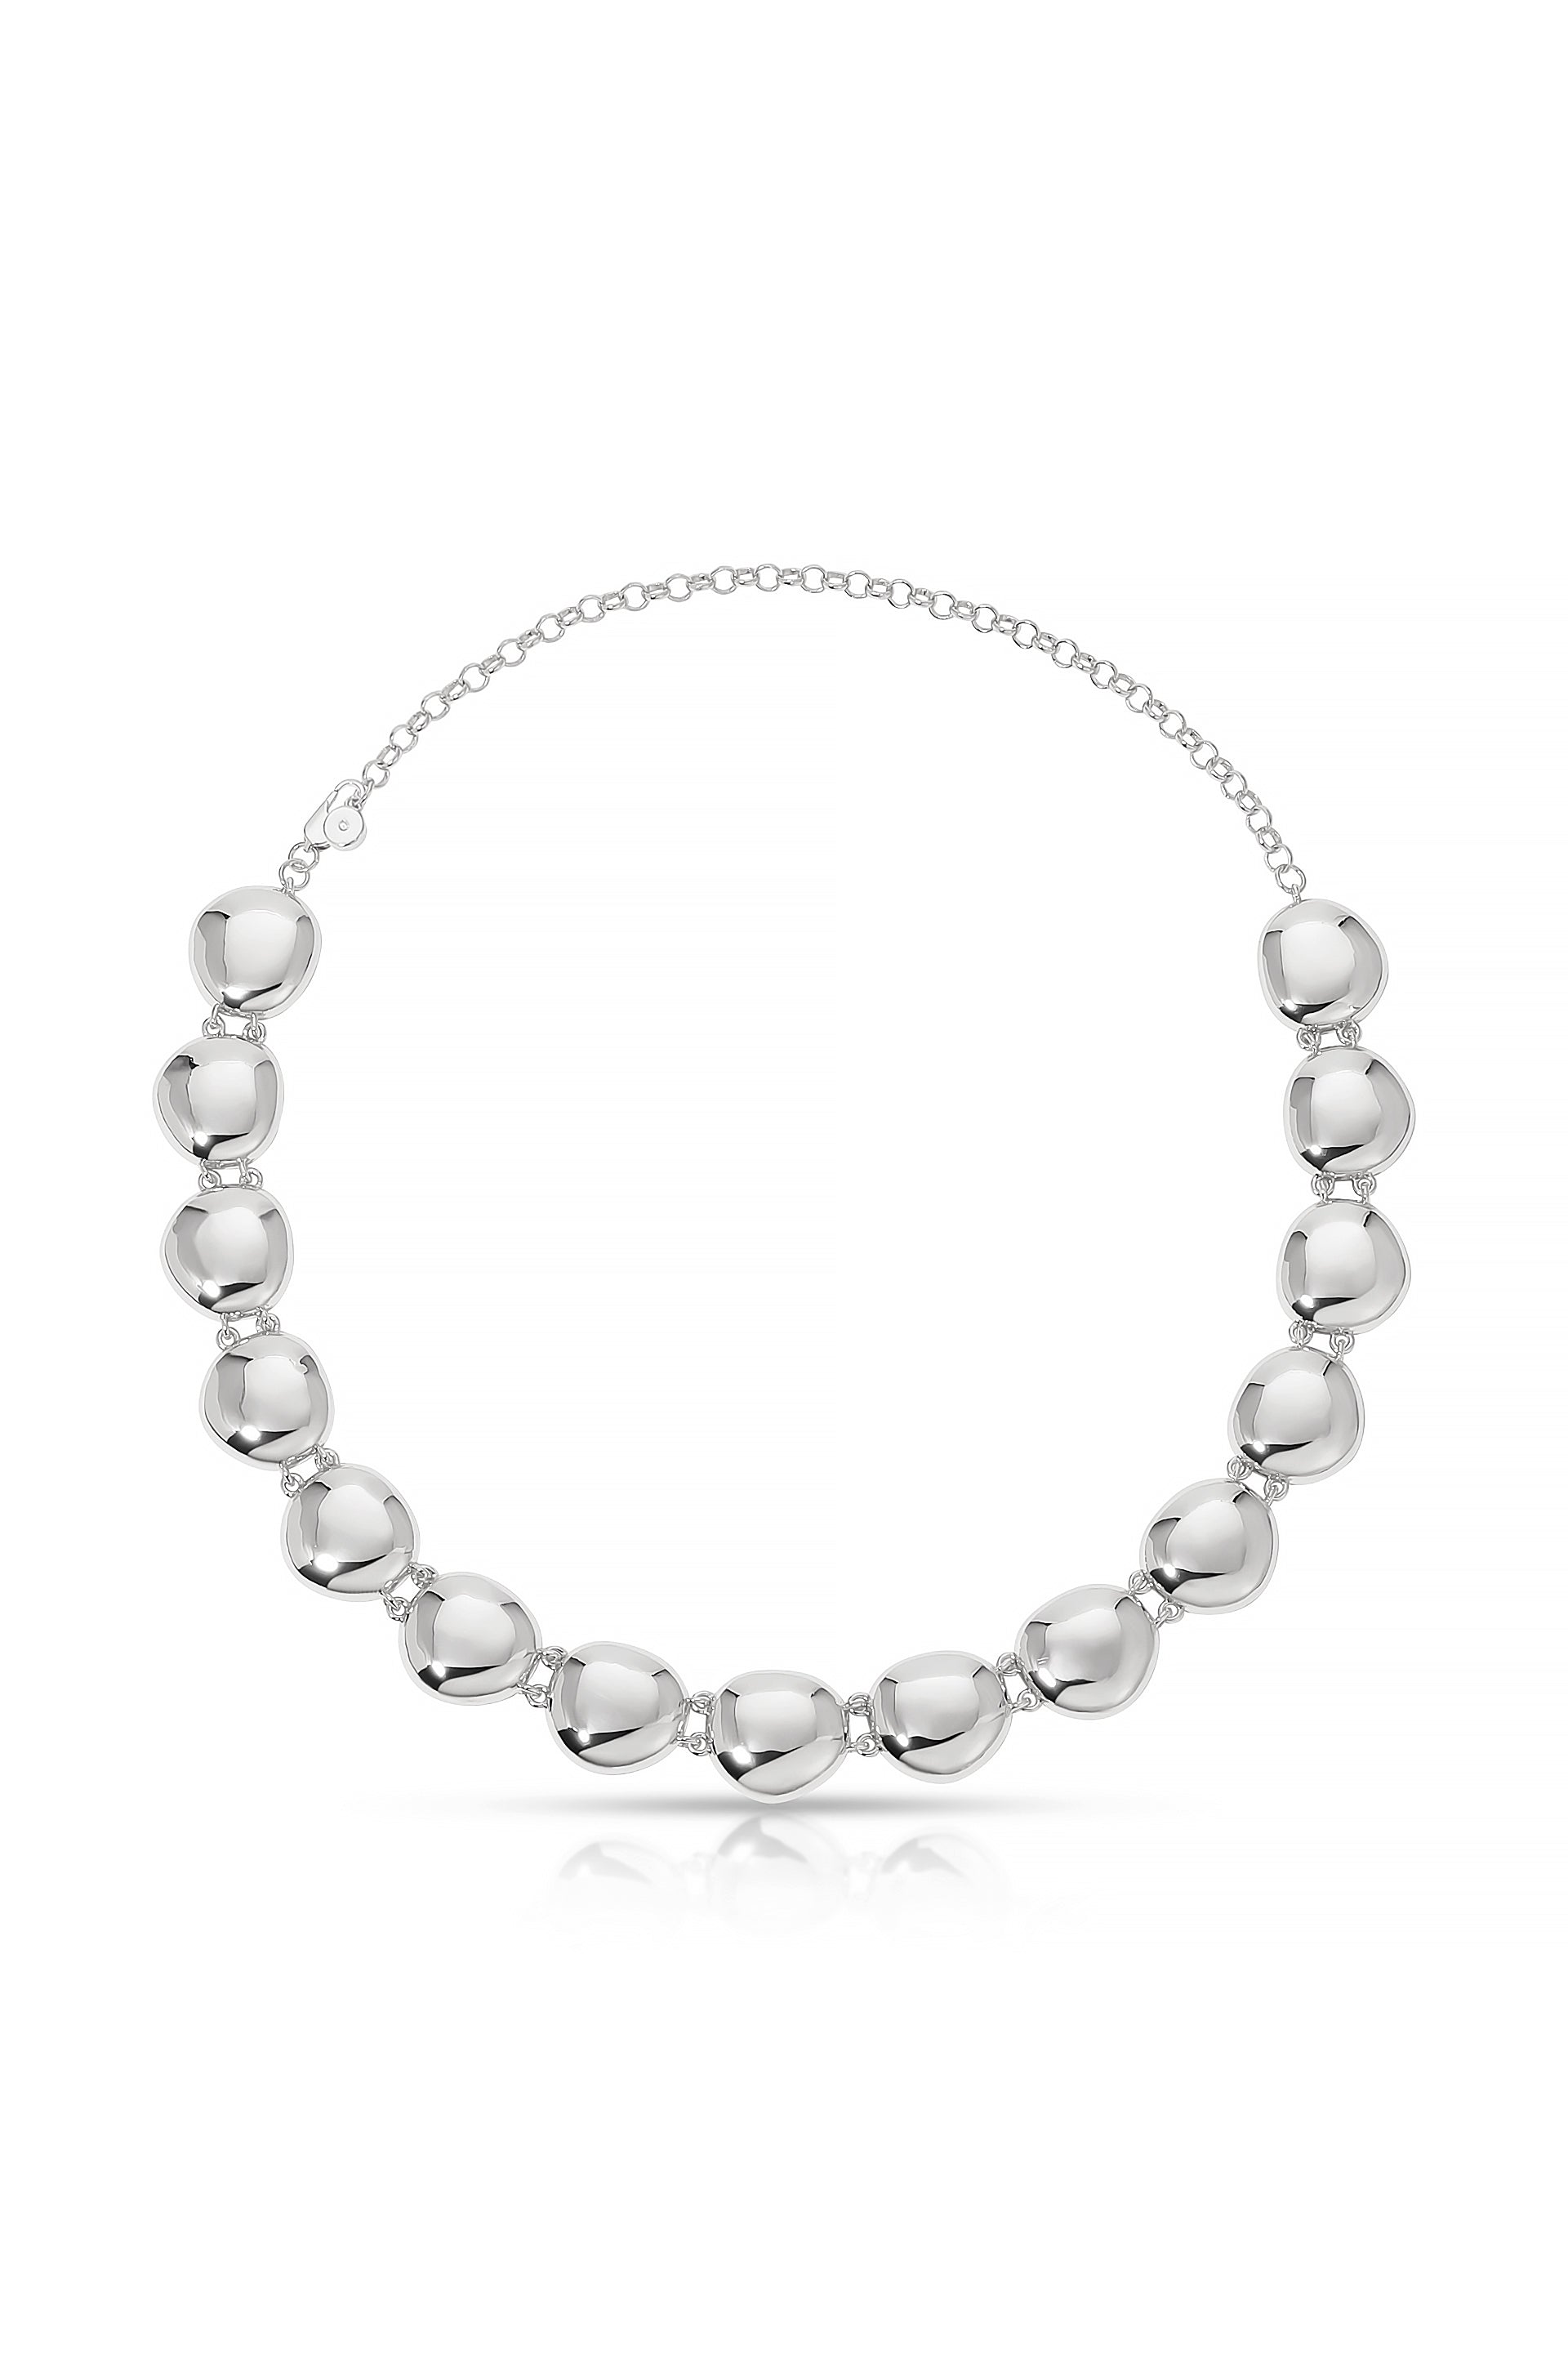 Polished Pebble Choker Necklace in rhodium